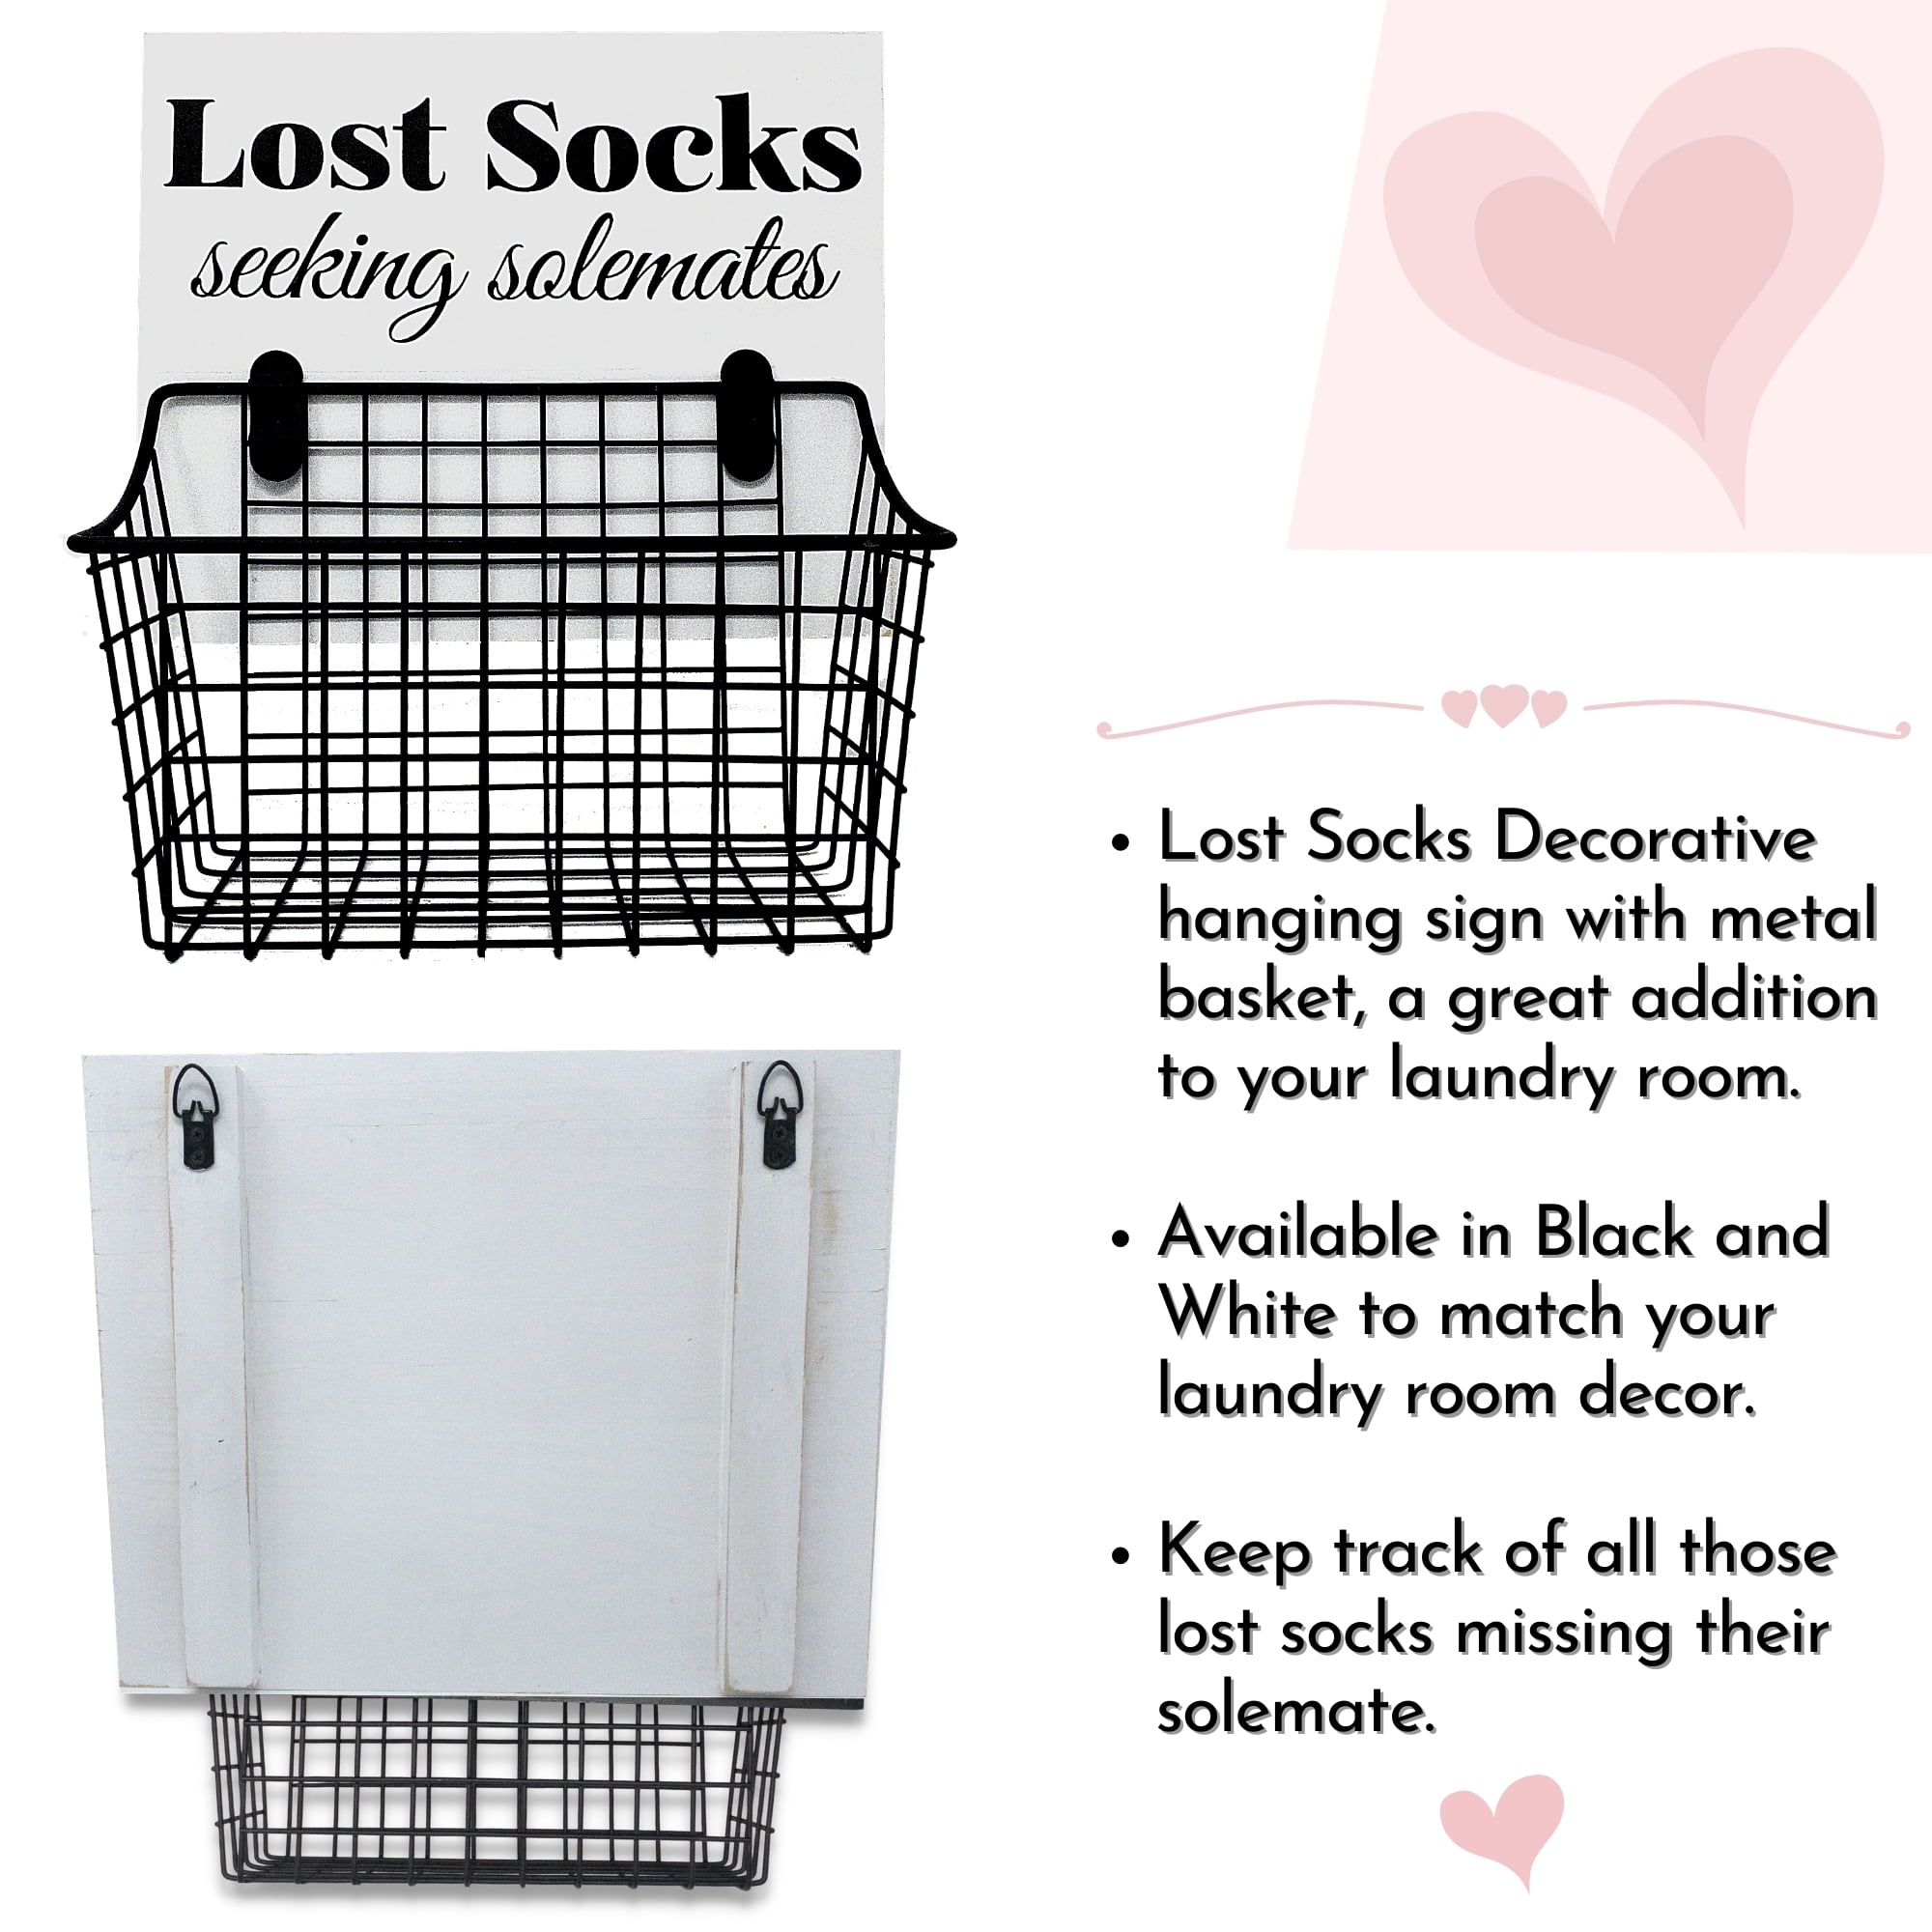 "LOST Socks Seeking SOLEMATES" Rustic Wall Stenciled Hanging Wooden Sign Laundry 